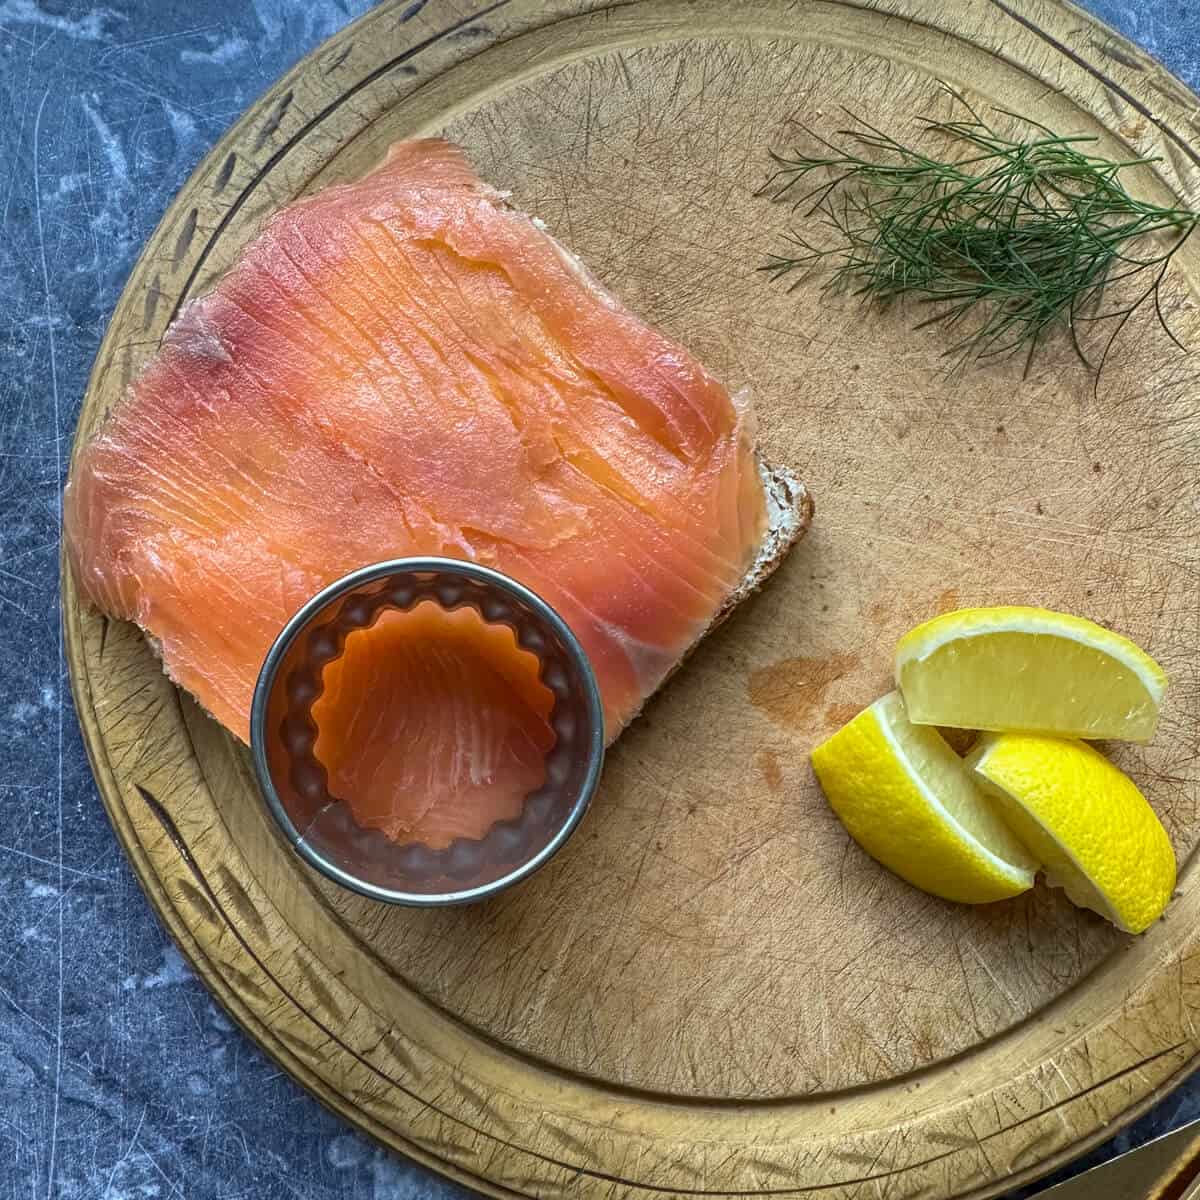 A round cookie cutter on top of a piece of bread and smoked salmon.